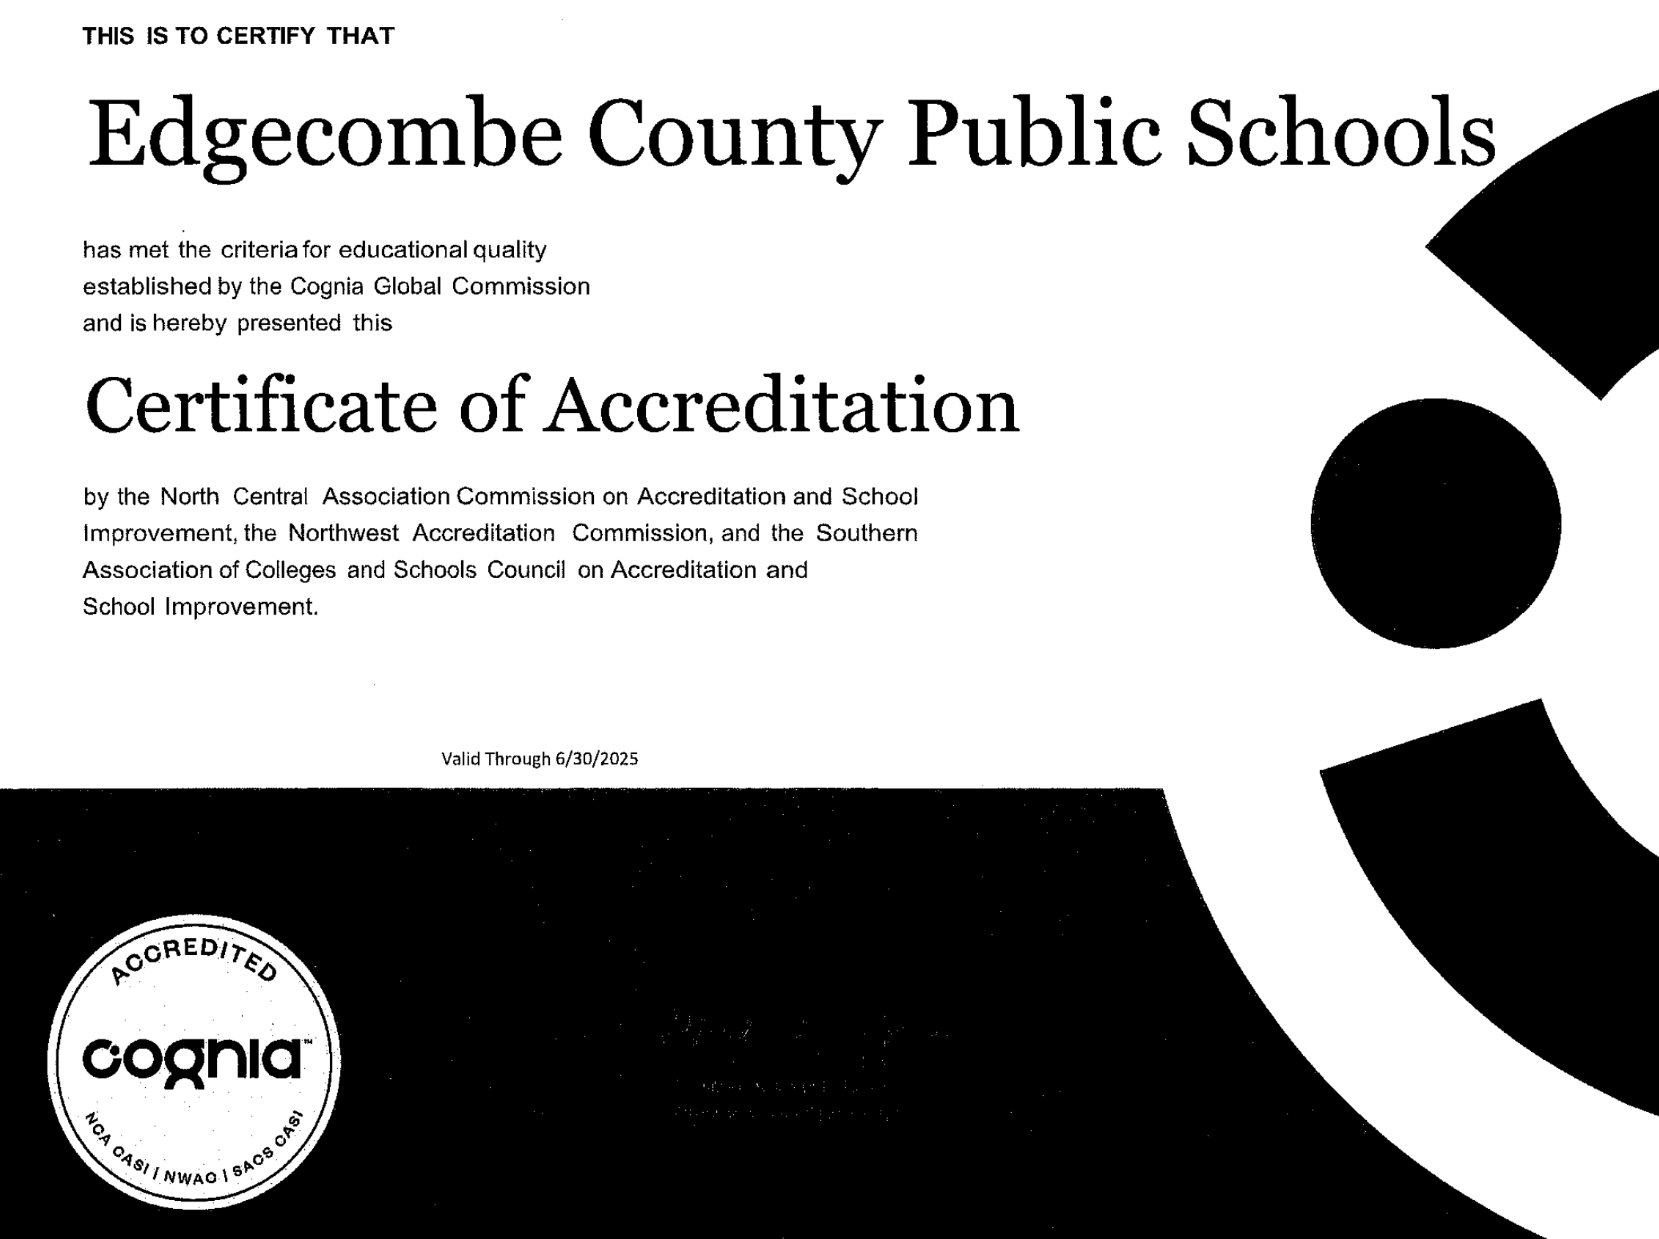 Edgecombe County Public Schools has met the criteria for educational quality established by the Cognia Global Commission and is hereby presented this Certificate of Accreditation by the North Central Association Commission on Accreditation and School Improvement, the Northwest Accreditation Commission, and the Southern Association of Colleges and Schools Council on Accreditation and School Improvement.